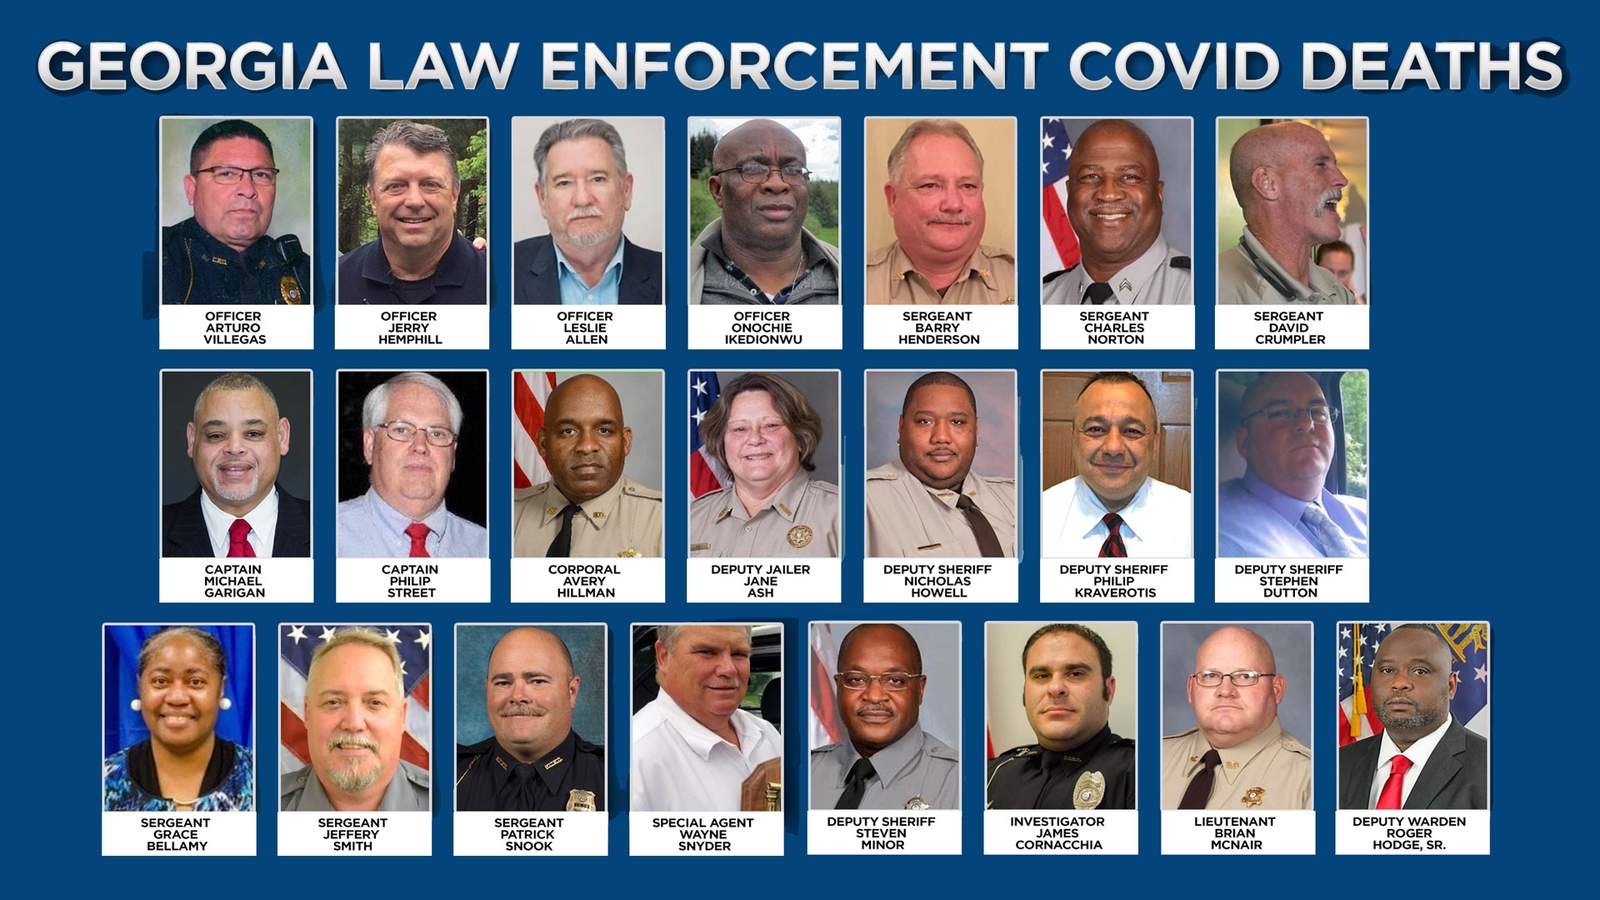 22 Georgia law enforcement officers have died with COVID-19